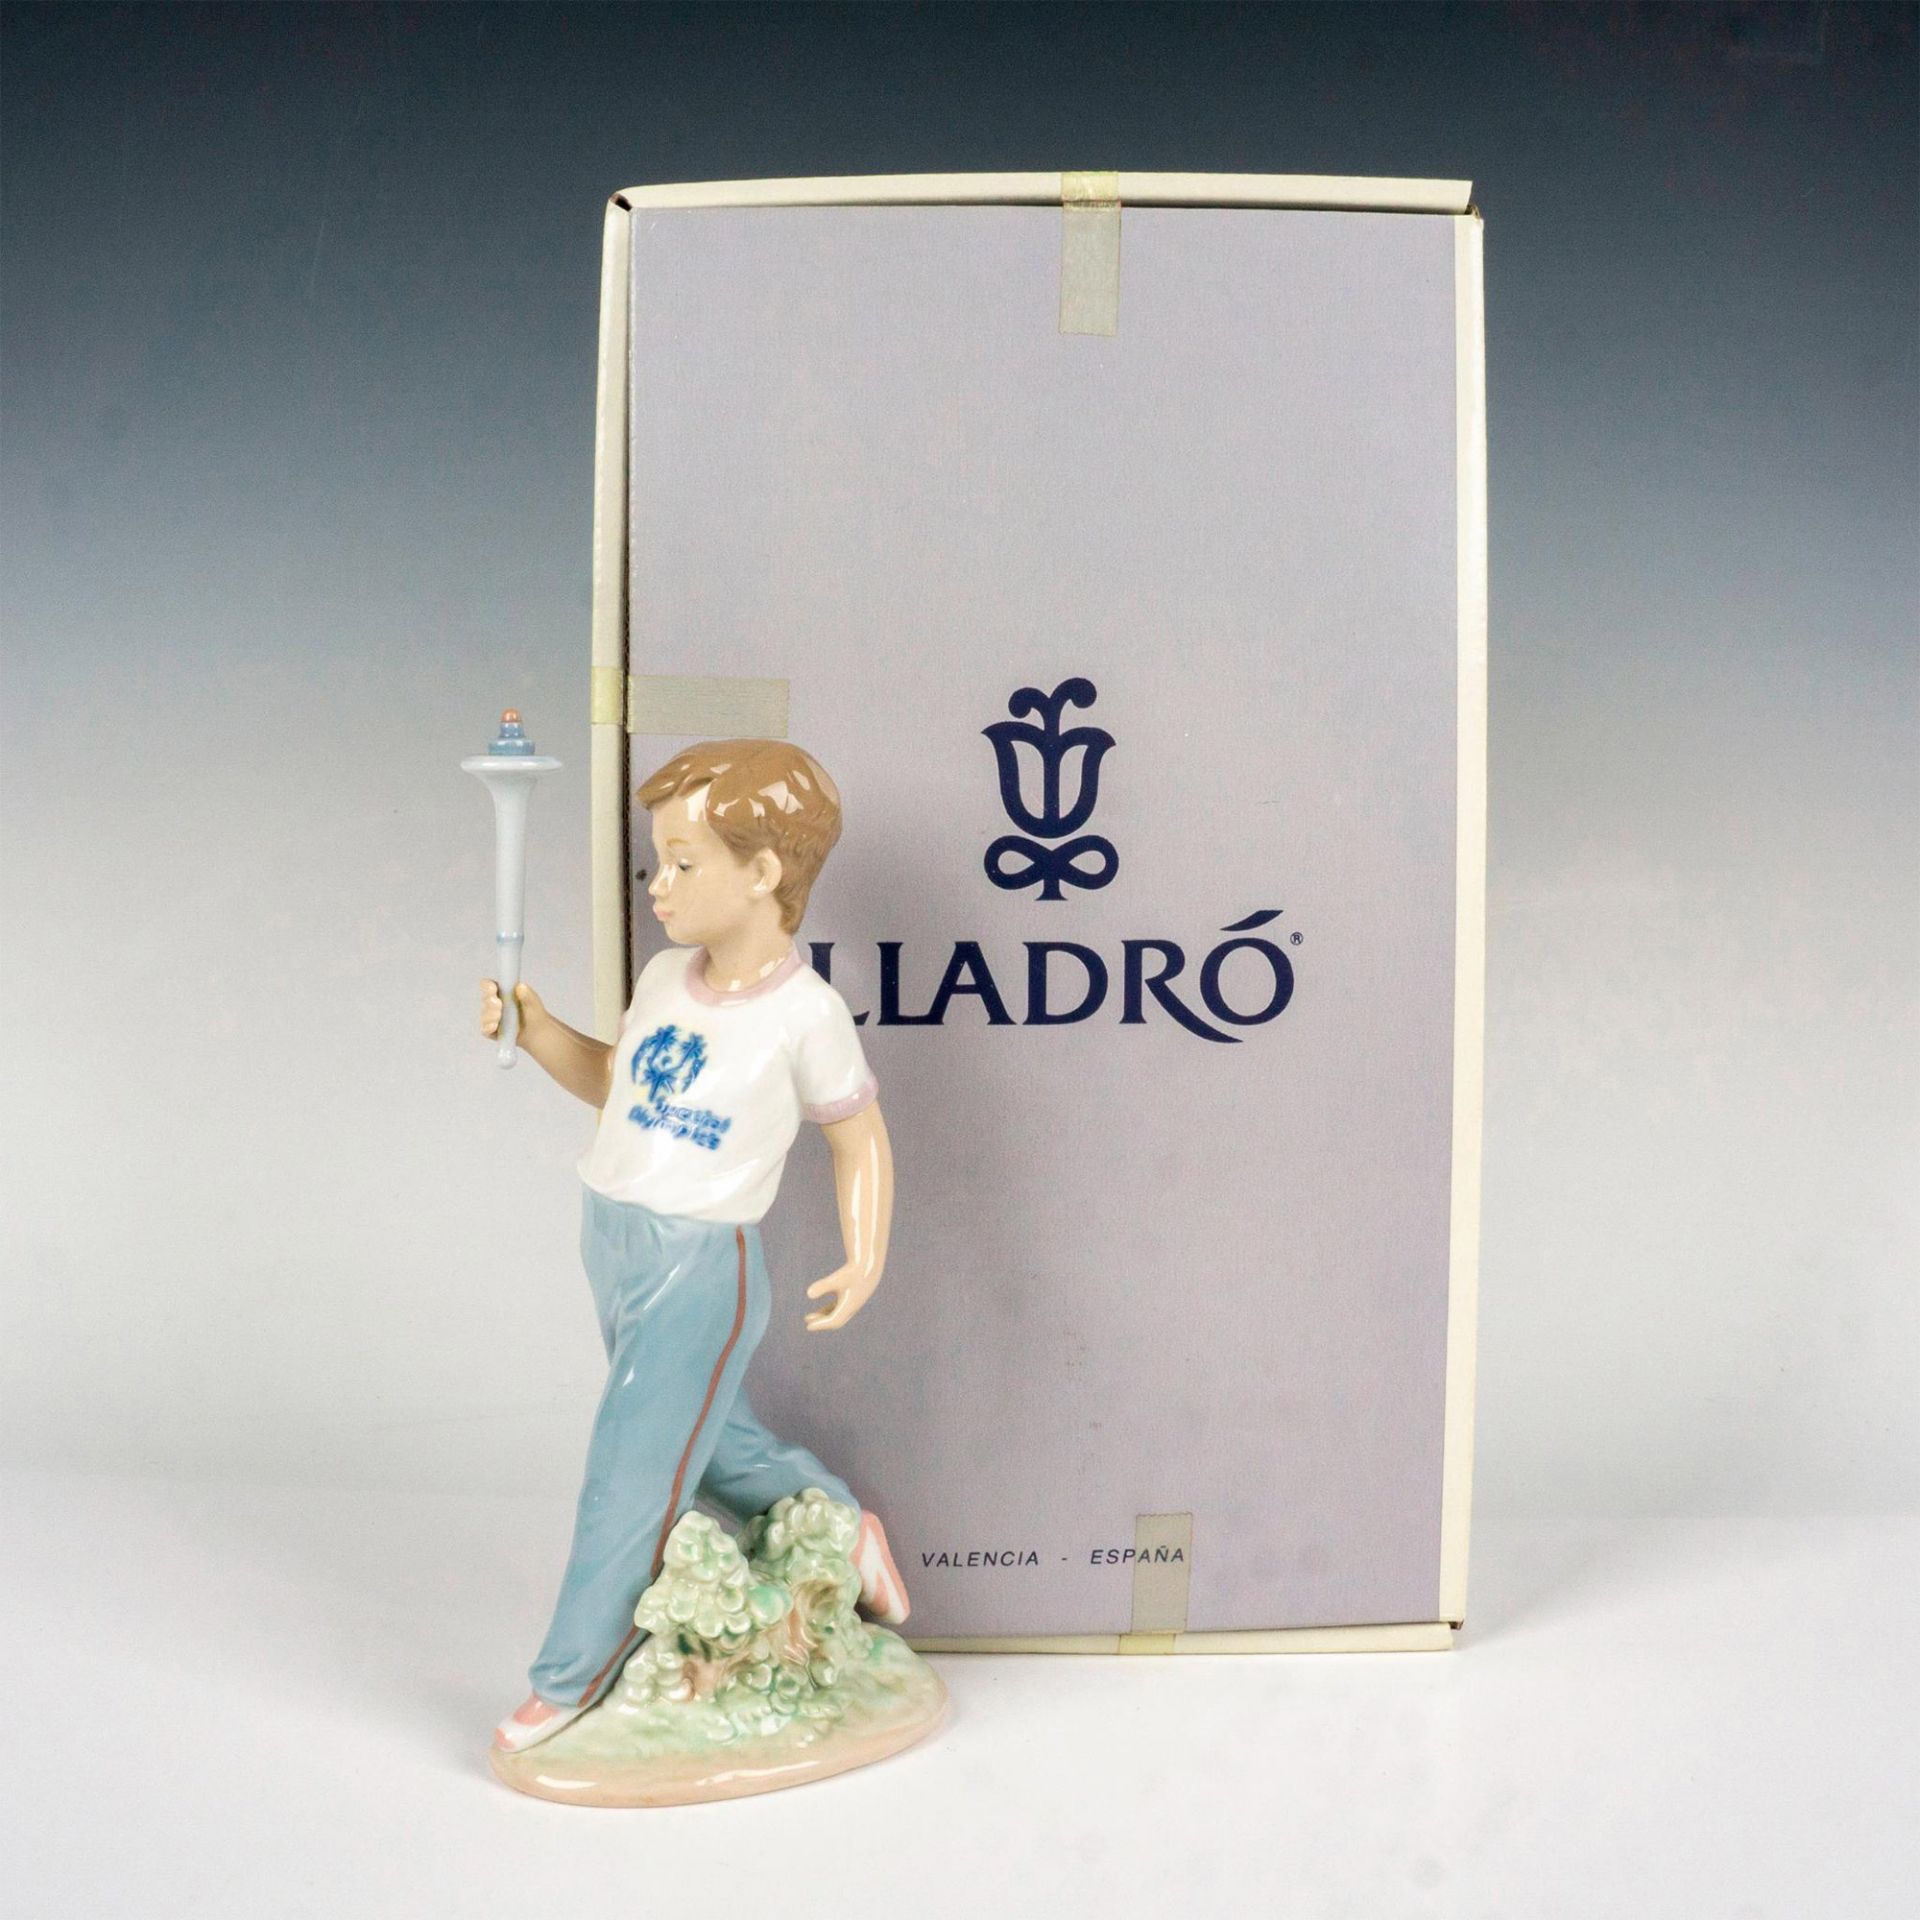 Courage (Spec Olympic) 1007522 - Lladro Porcelain Figurine - Image 4 of 4